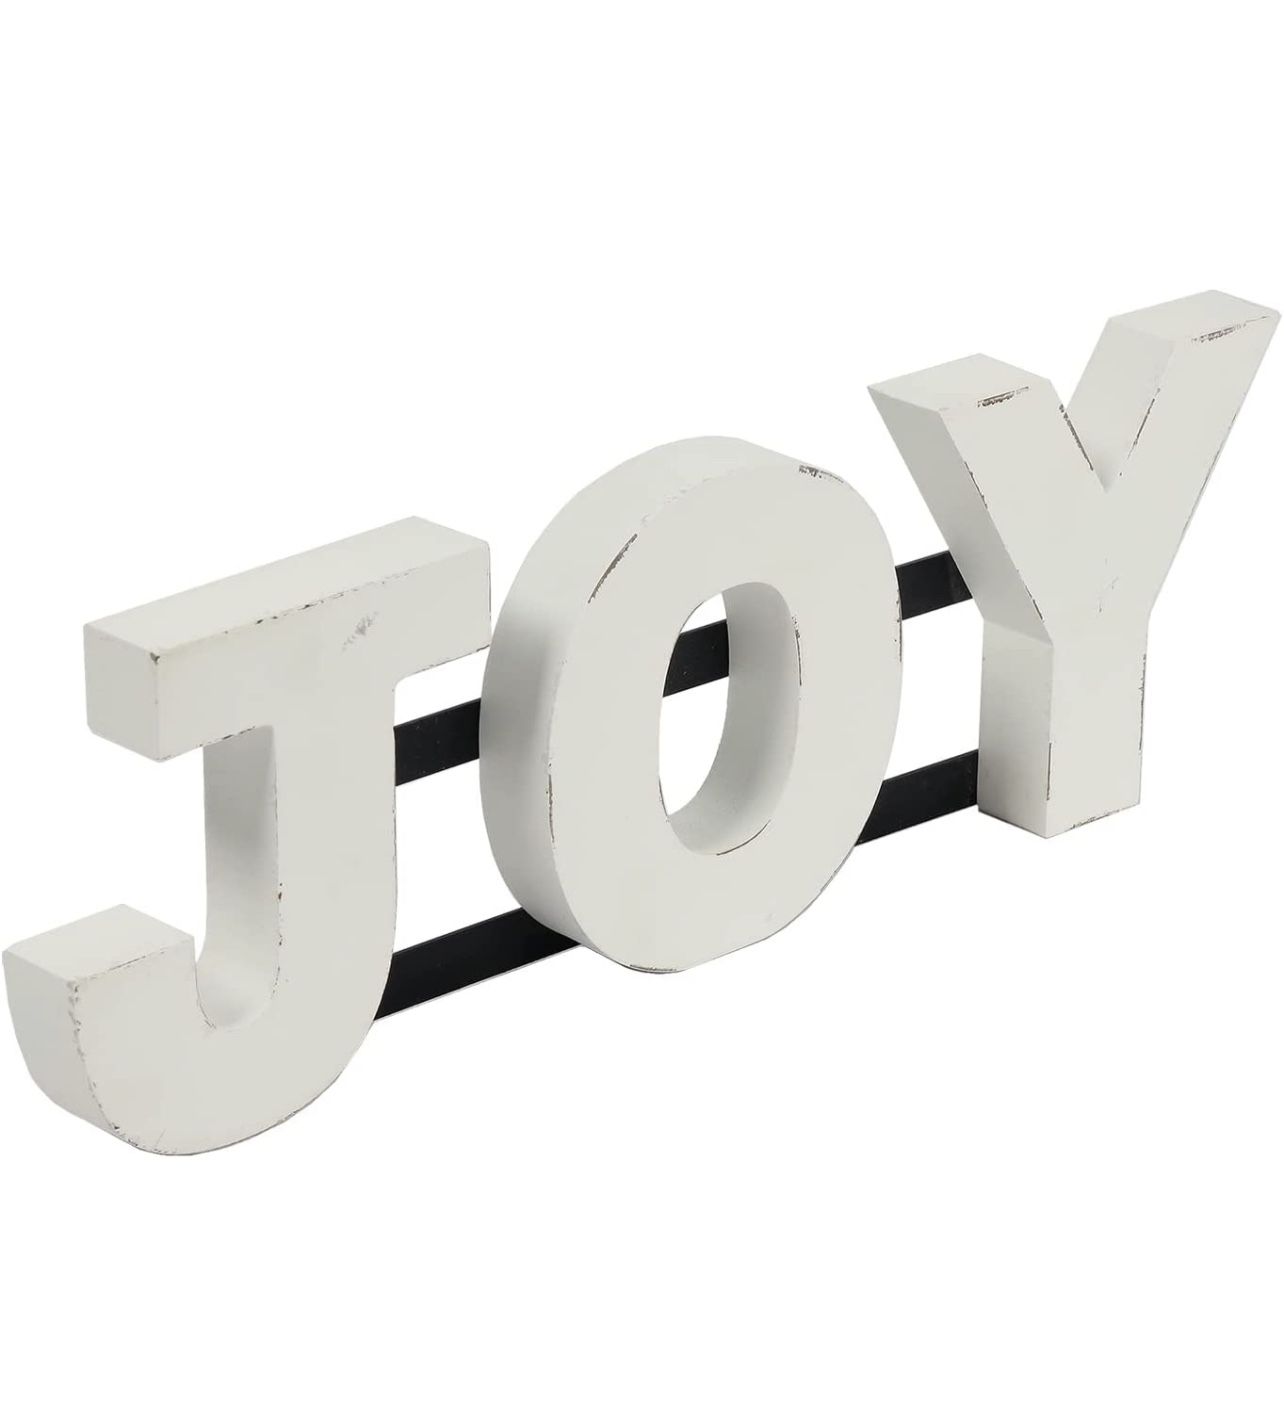 Rustic Joy Christmas Decor for Tabletop 16", Hanging Distressed White Farmhouse Joy Signs for Home Decor, Vintage Joy Wall Decor, Christmas Wood Signs